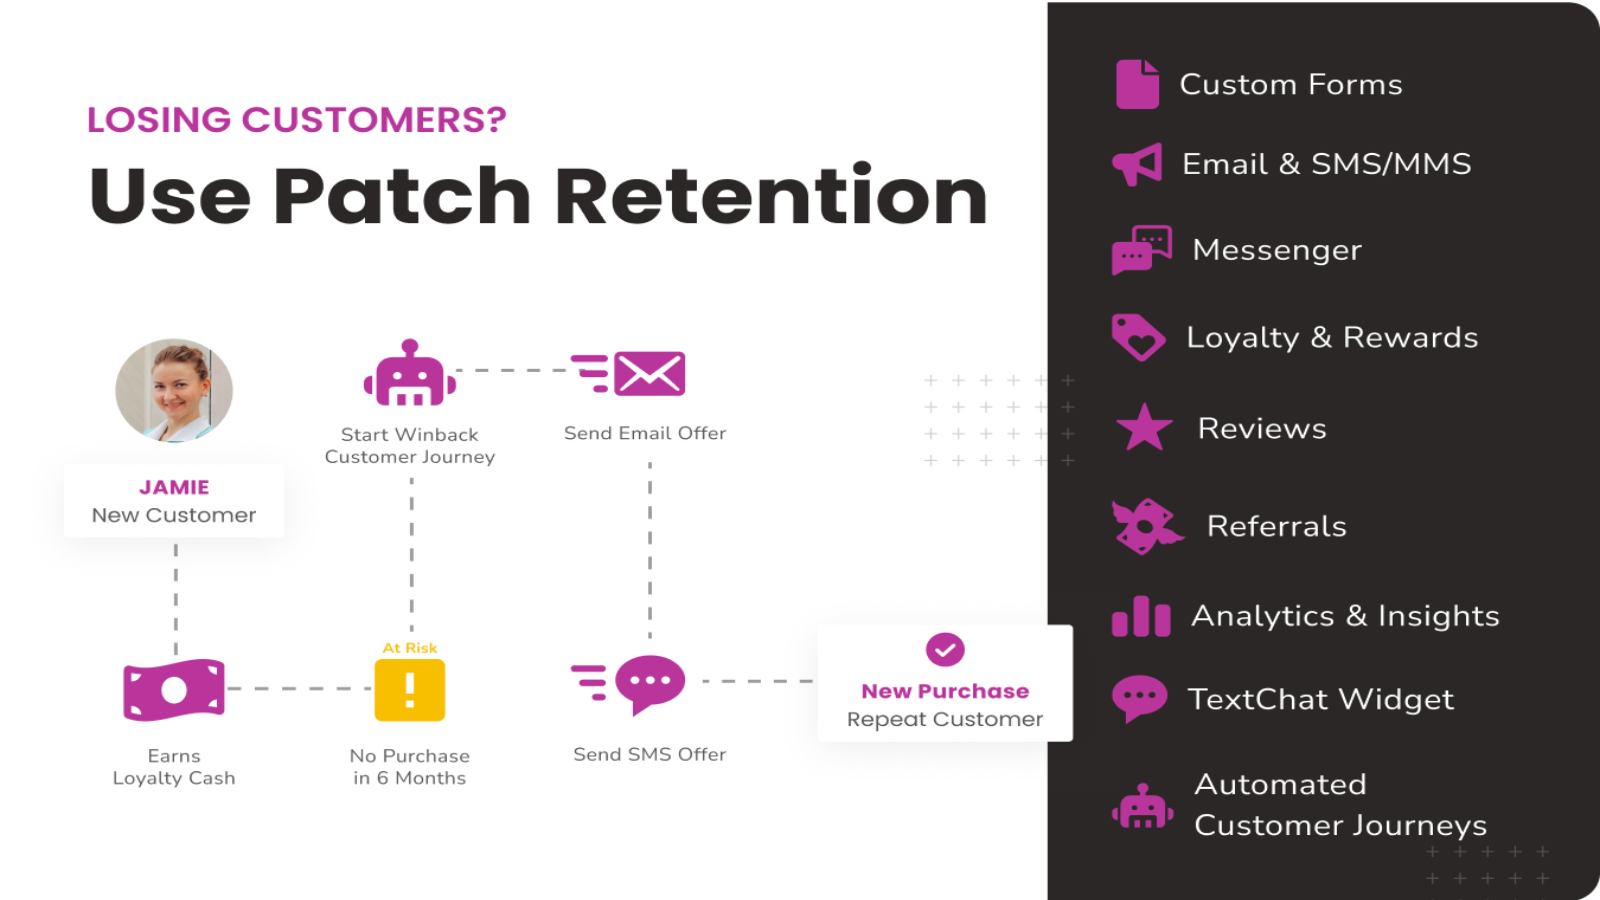 Get every tool that you need to execute your retention strategy 